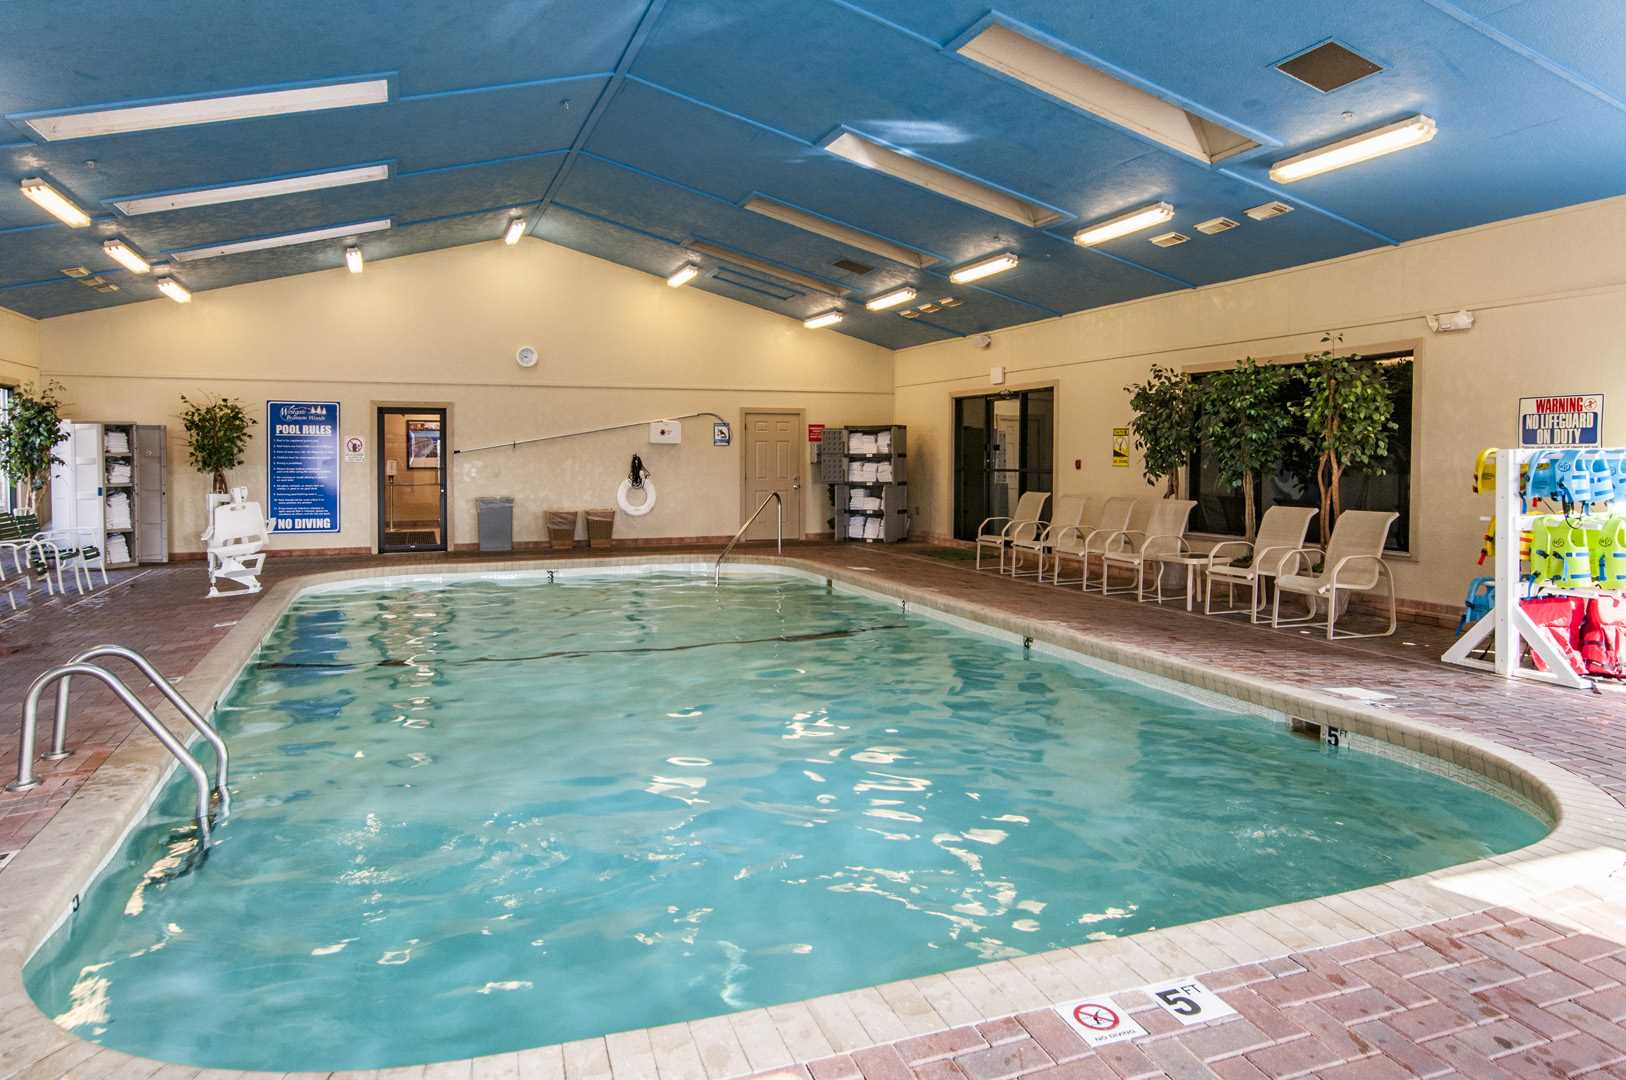 The indoor pool is open year round!